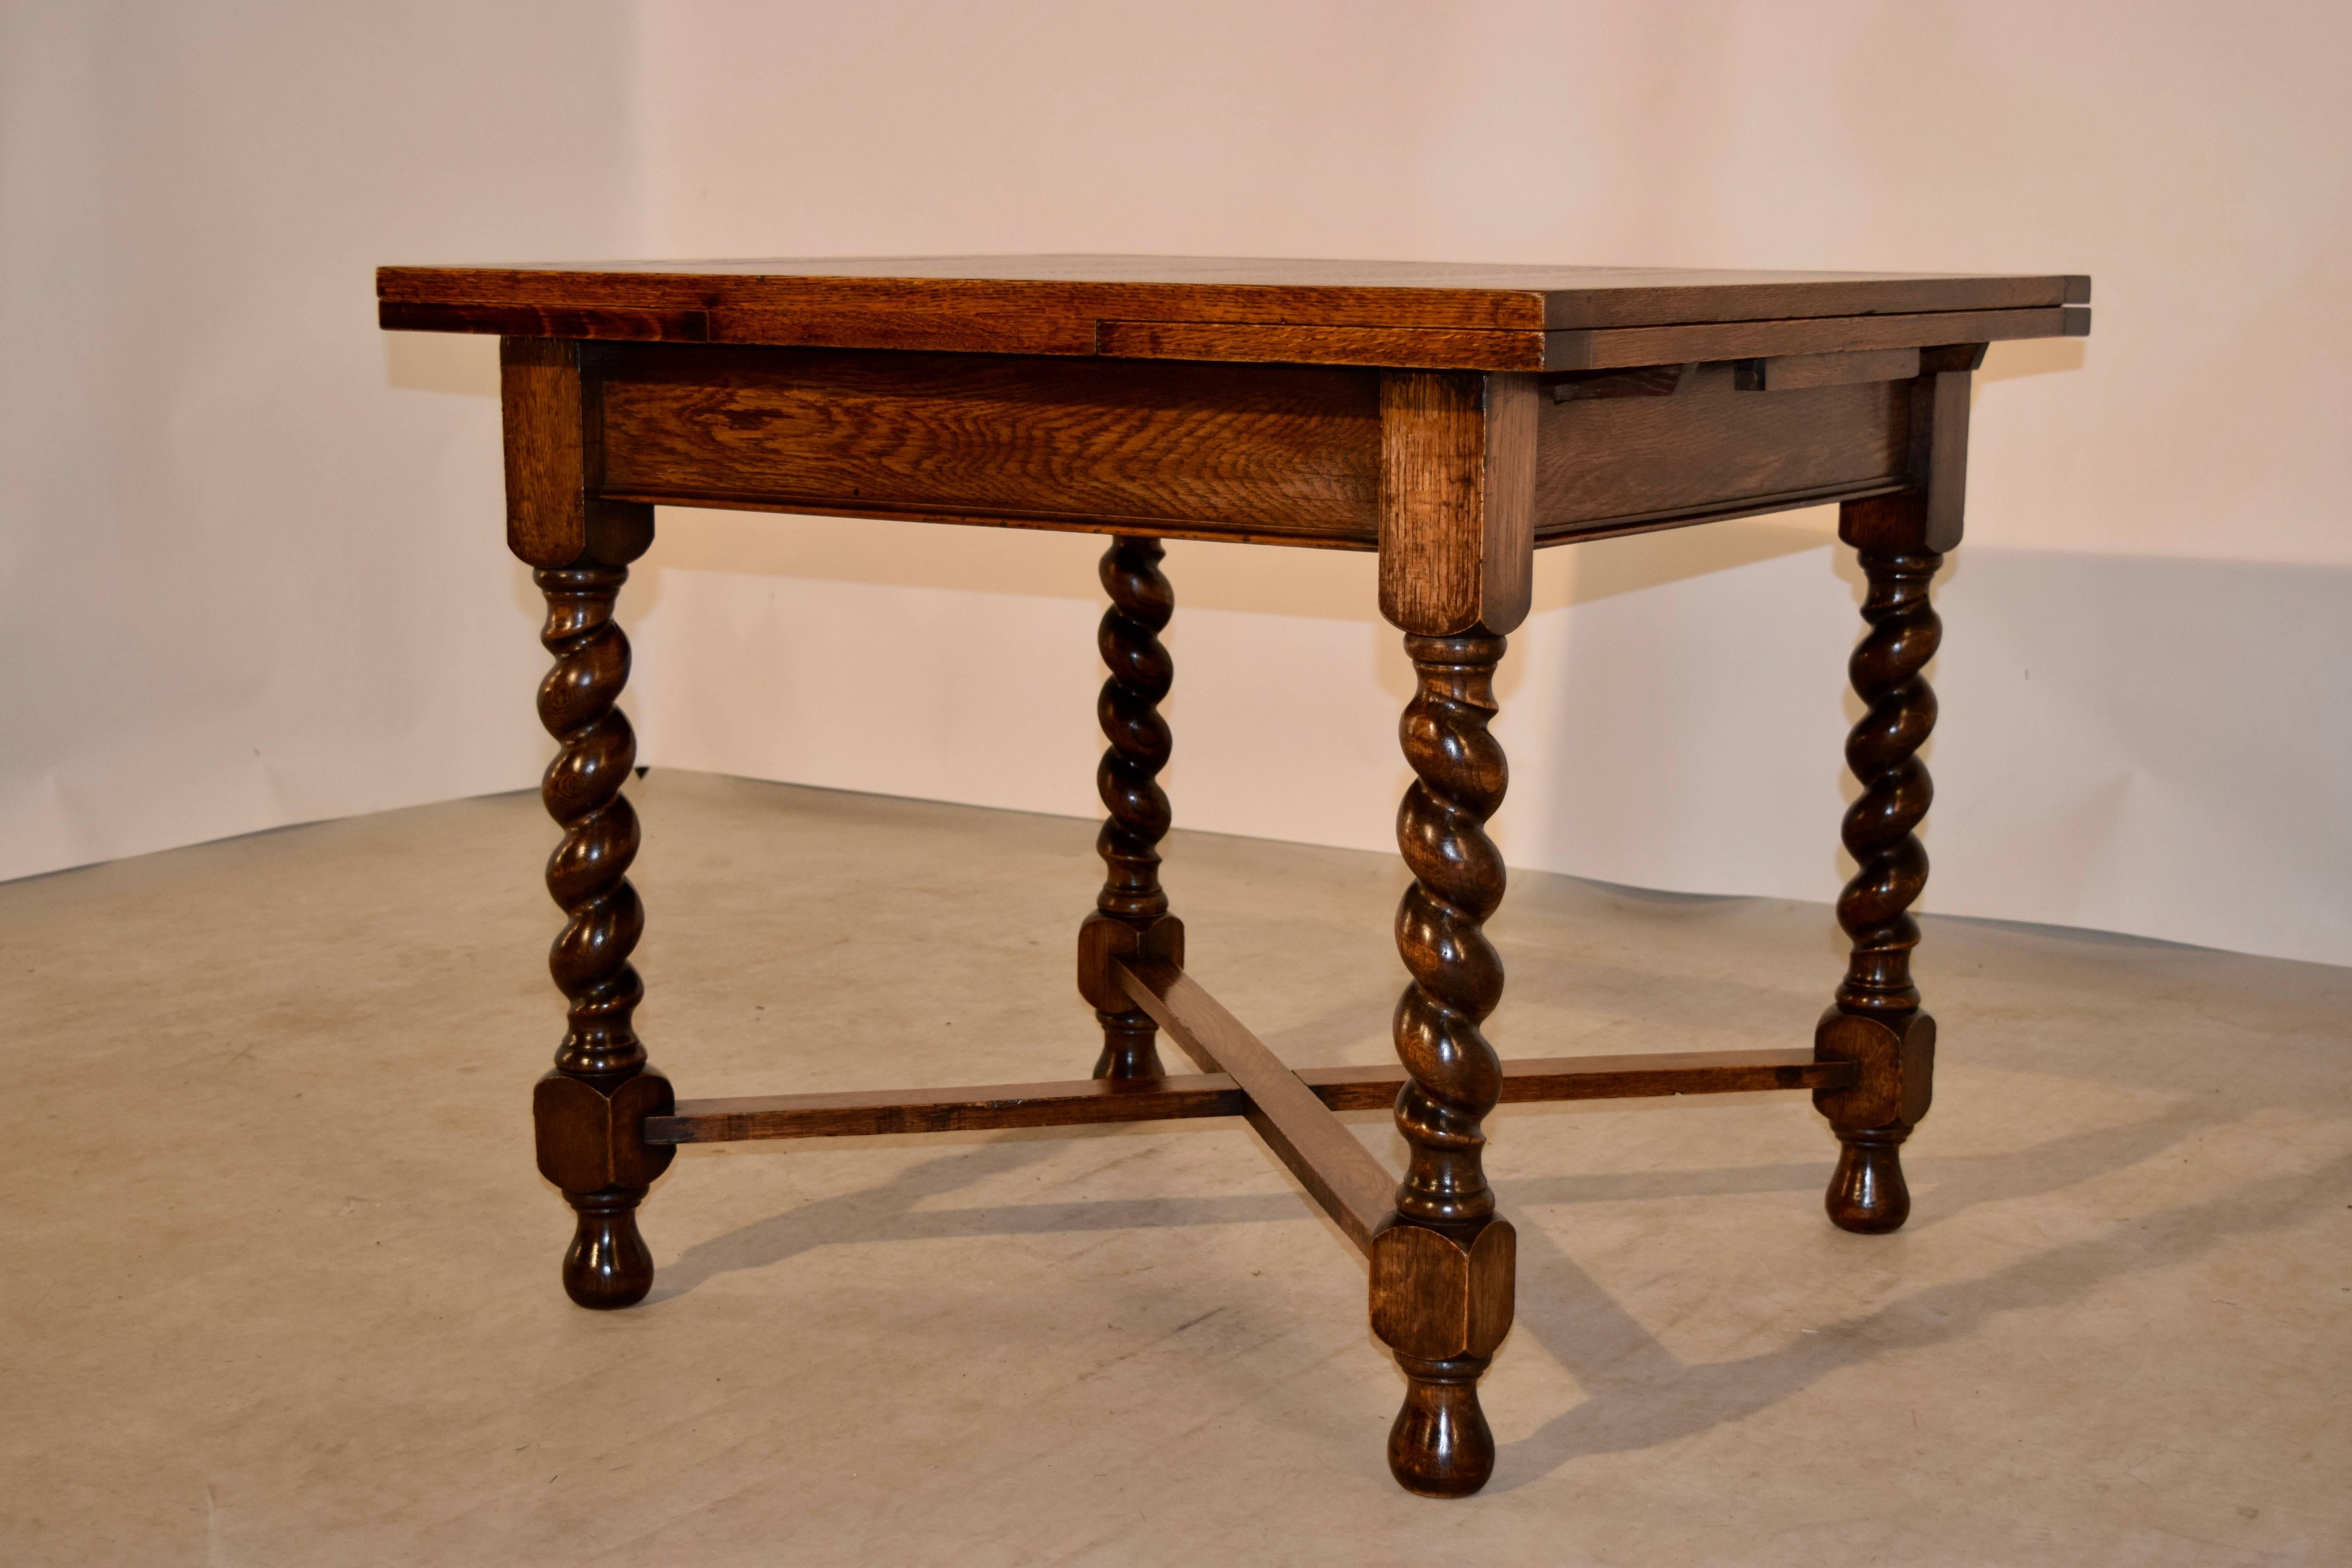 English oak draw-leaf table with paneled top and leaves, following down to a simple apron, and supported on hand-turned barley twist legs, which are joined by cross stretchers and supported on turned feet, circa 1900. The top open measures 60.13 x